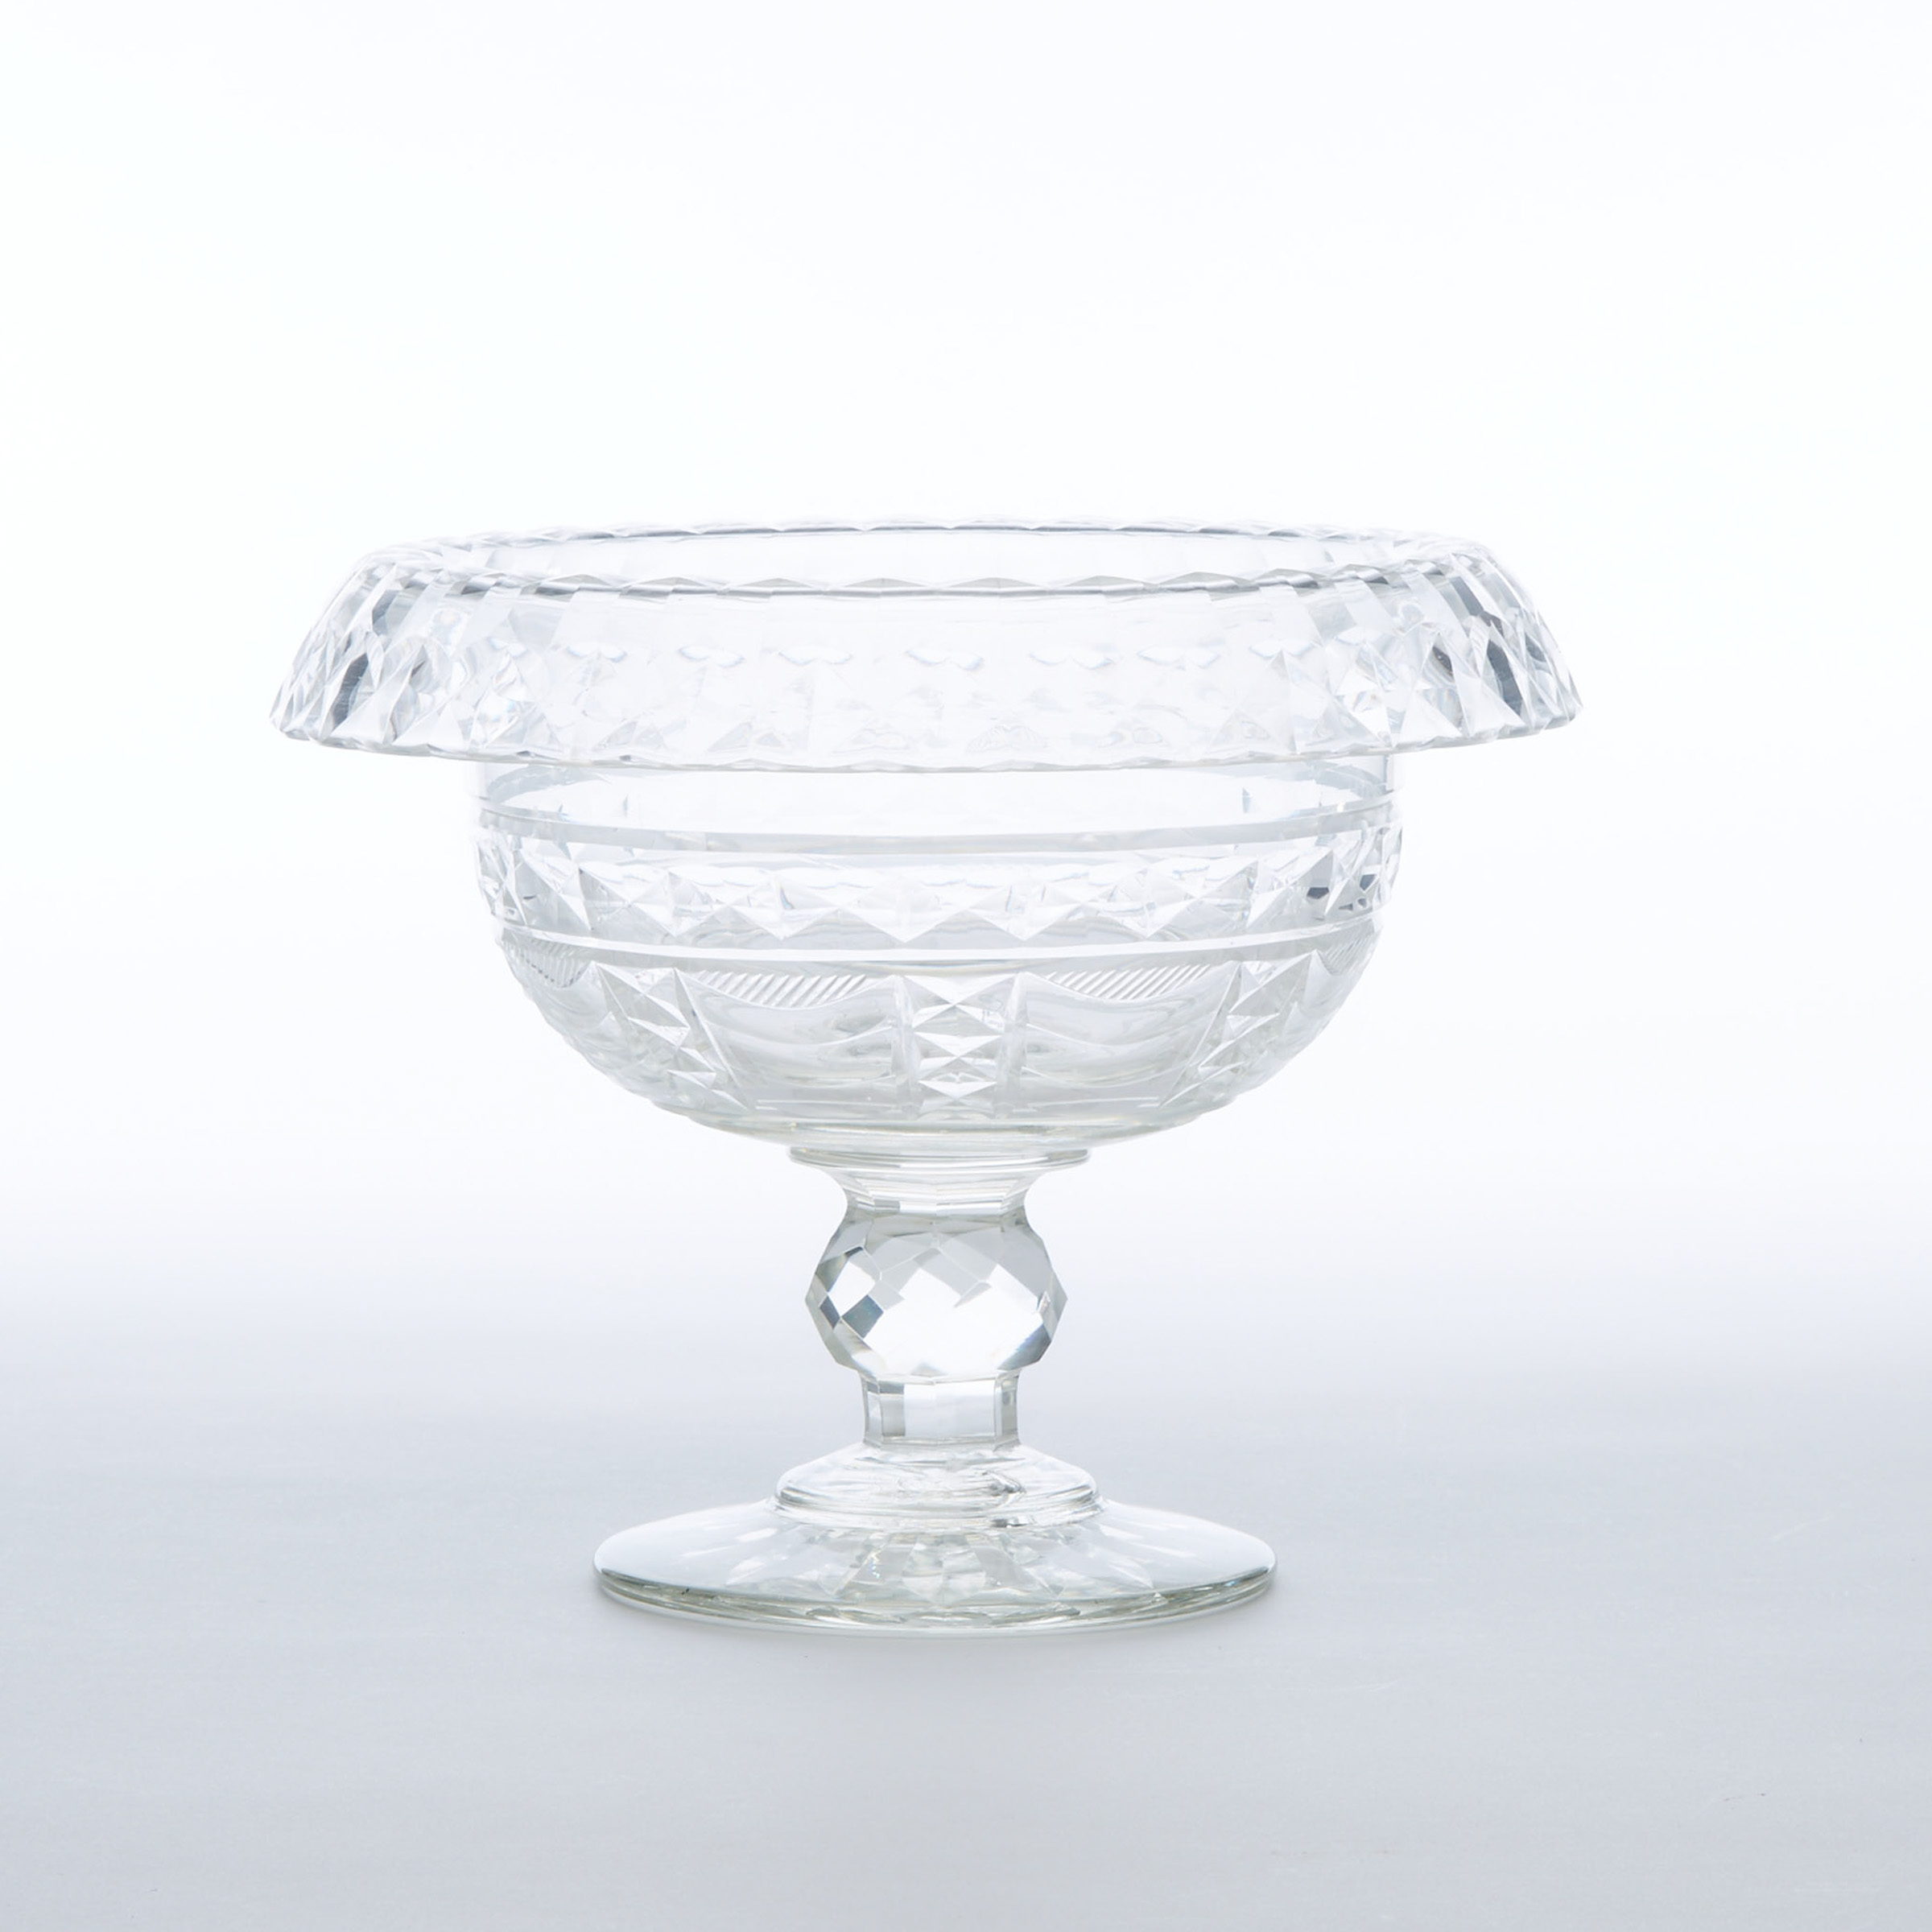 Continental Cut Glass Pedestal Footed Bowl, late 19th/early 20th century